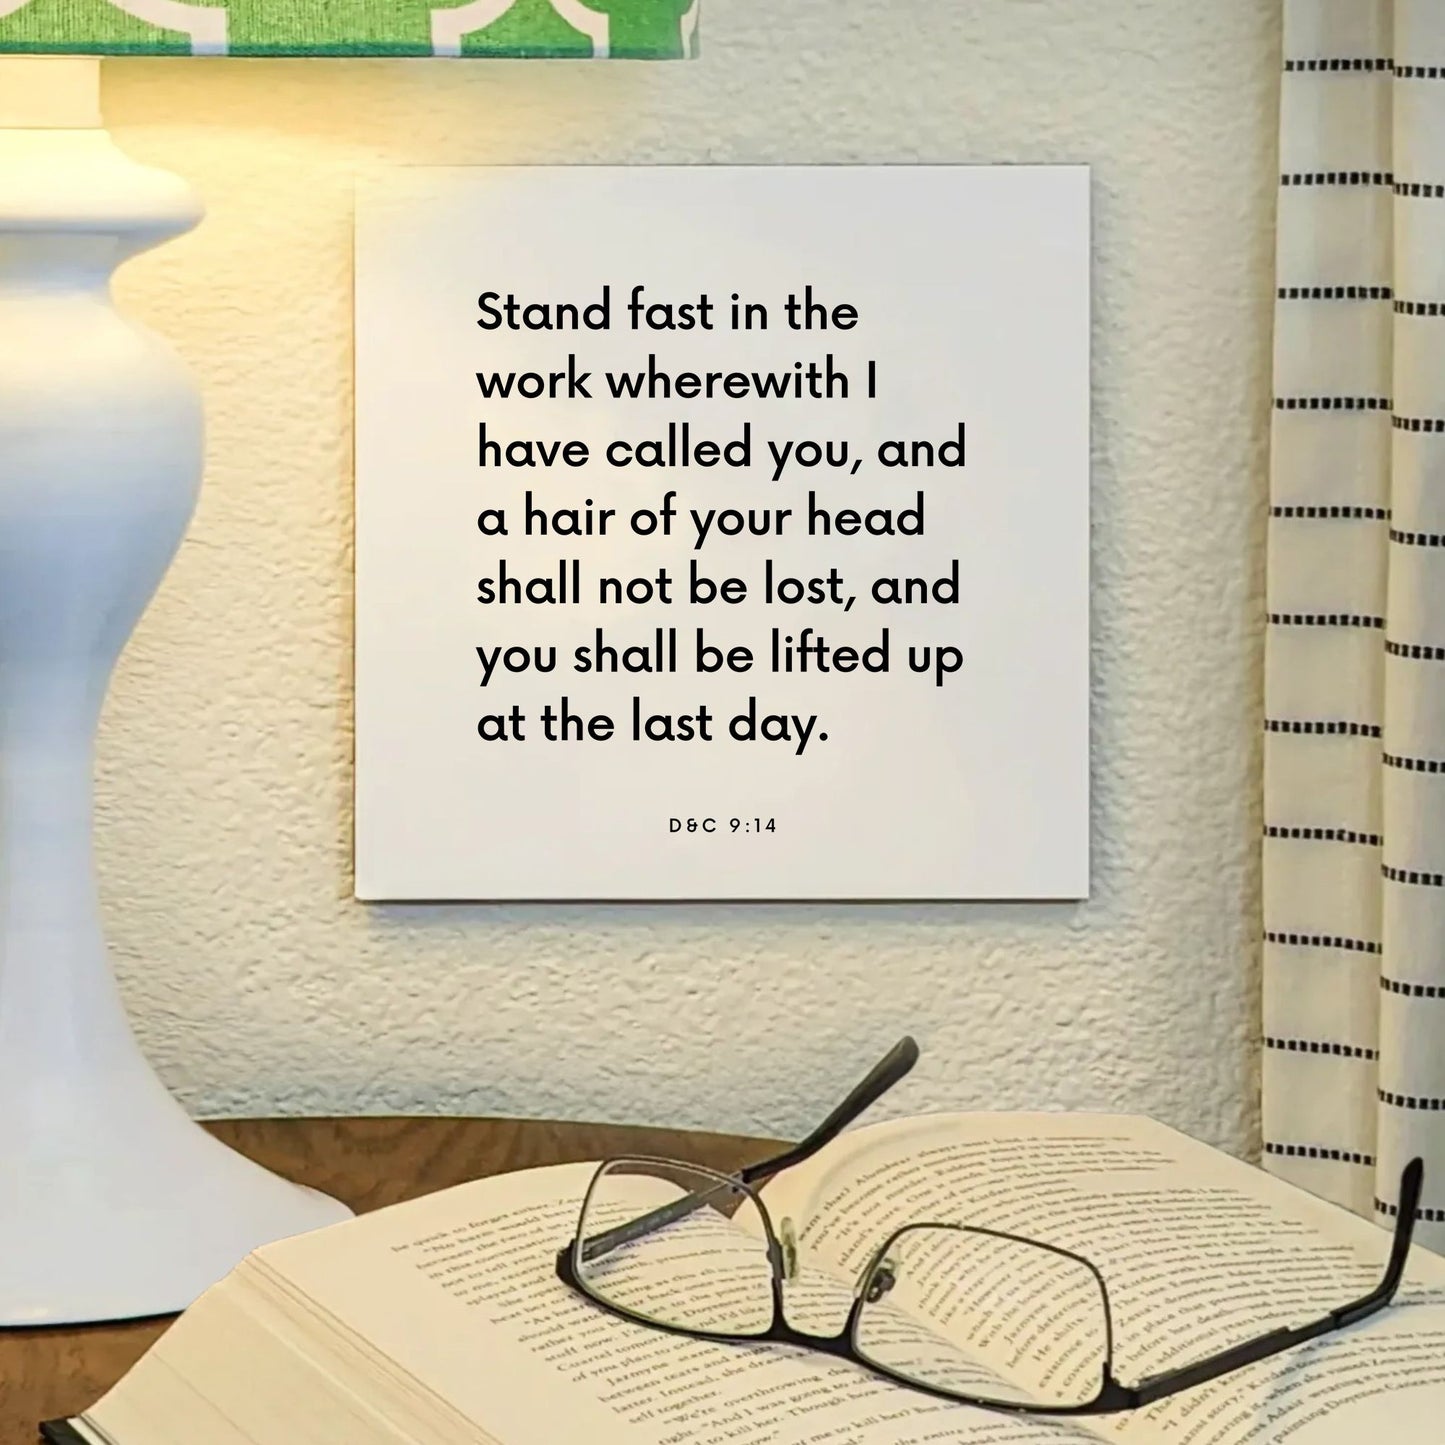 Lamp mouting of the scripture tile for D&C 9:14 - "Stand fast in the work wherewith I have called you"